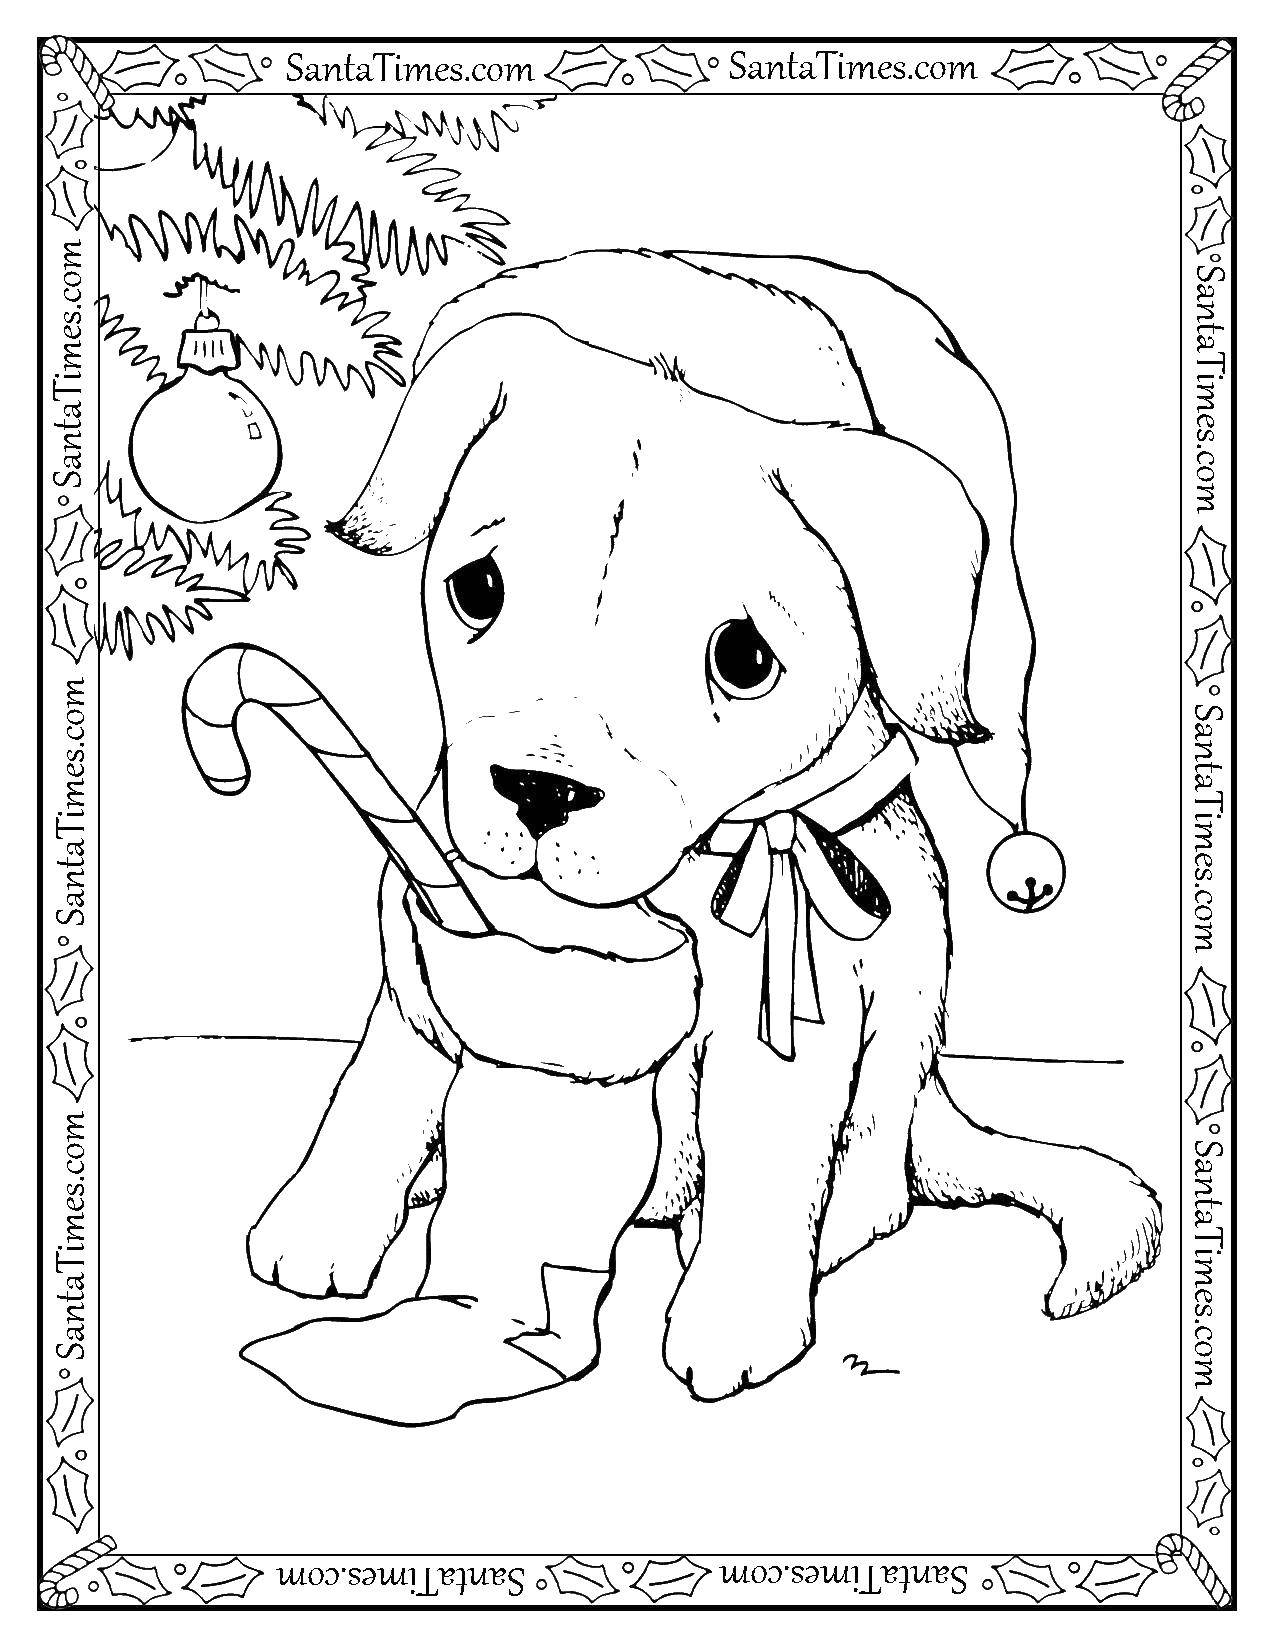 Coloring Christmas puppy. Category Pets allowed. Tags:  animals, dog, puppy, Christmas.